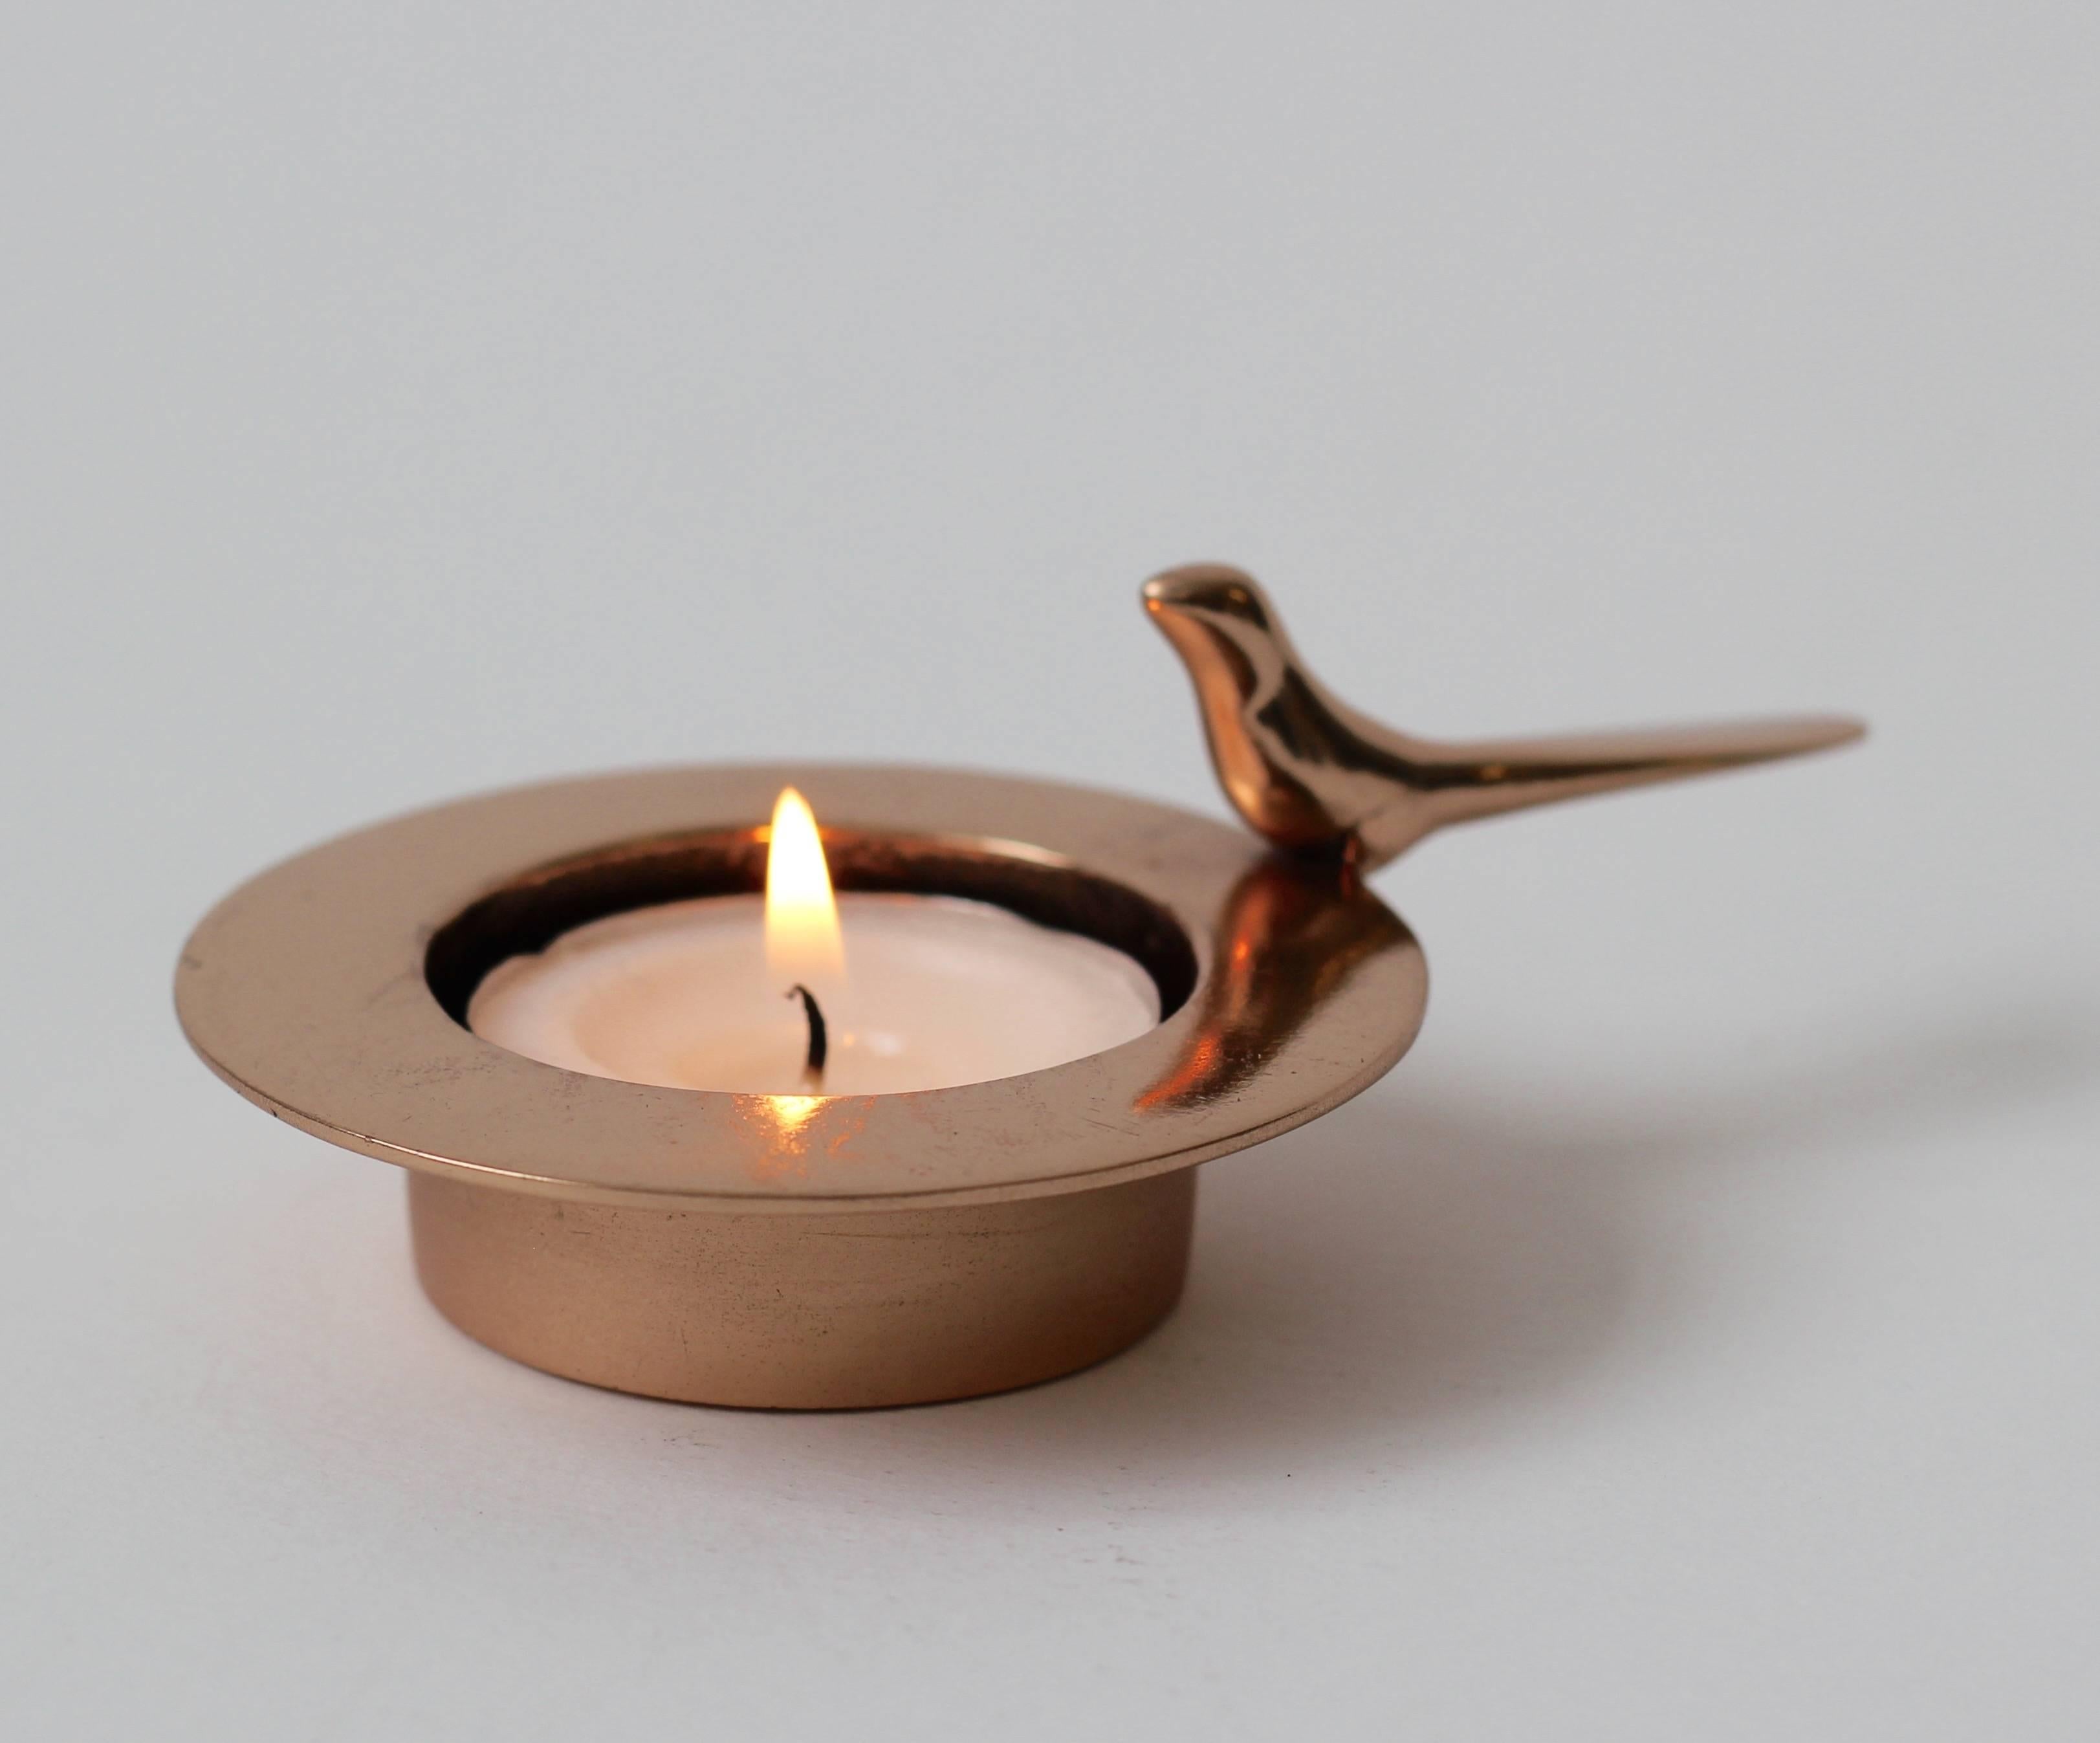 Each of those original and elegant bronze t-light holders is handmade individually. Cast using very traditional techniques, they are polished to reveal the luxurious finish of the material.

ORDERS OF MULTIPLE ACCESSORIES OF THE SAME TYPE: Please